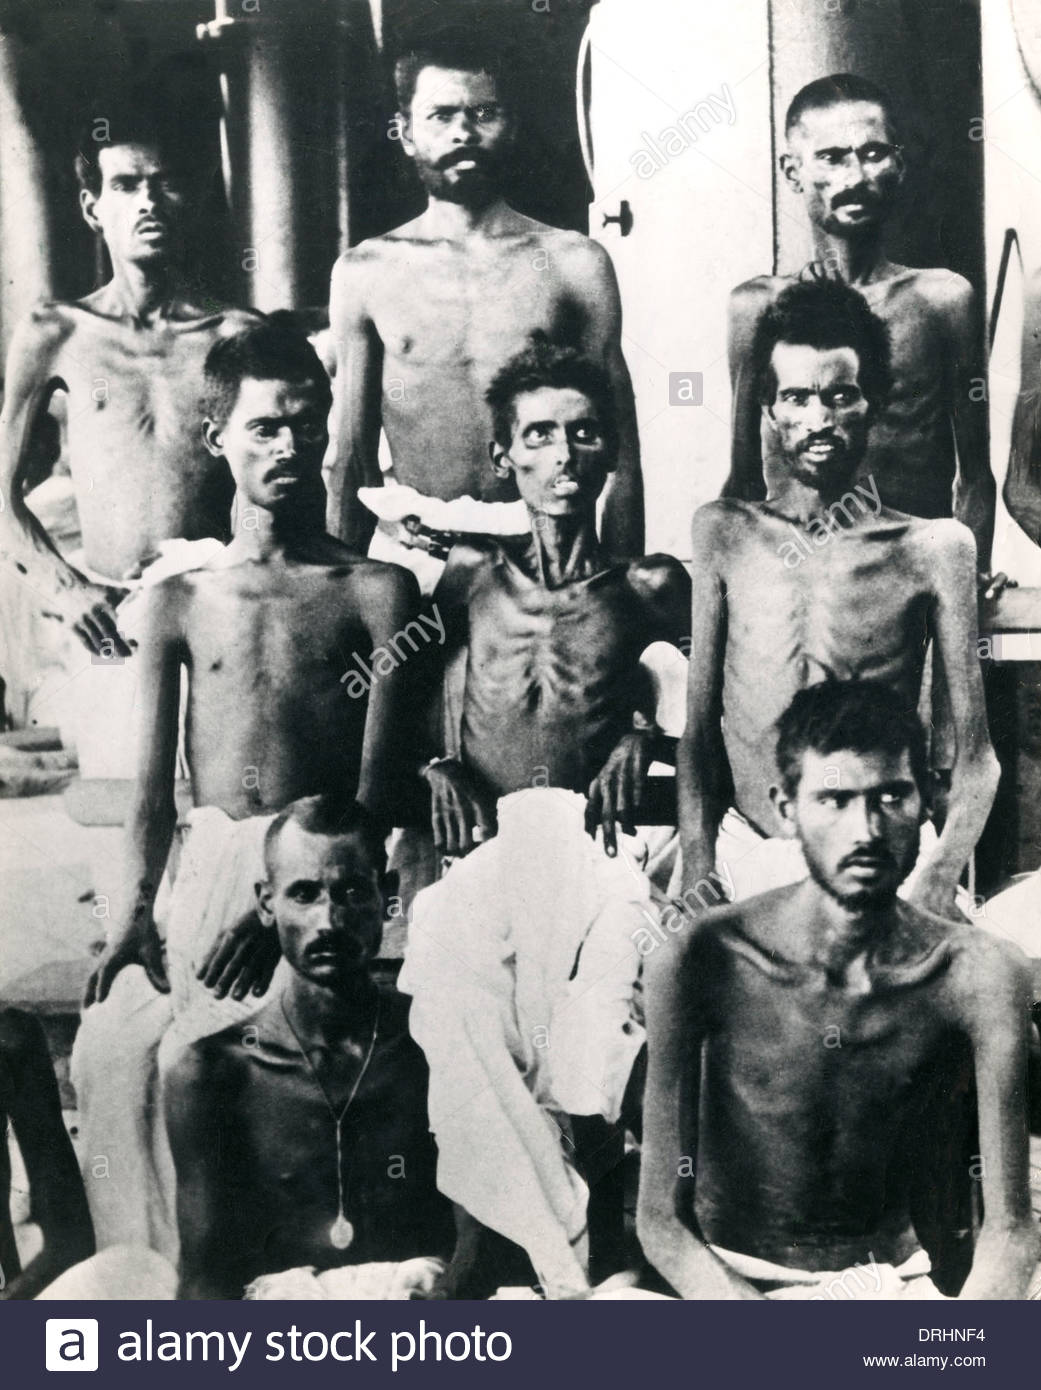 Starving Indian soldiers at siege of Kut, 1916.